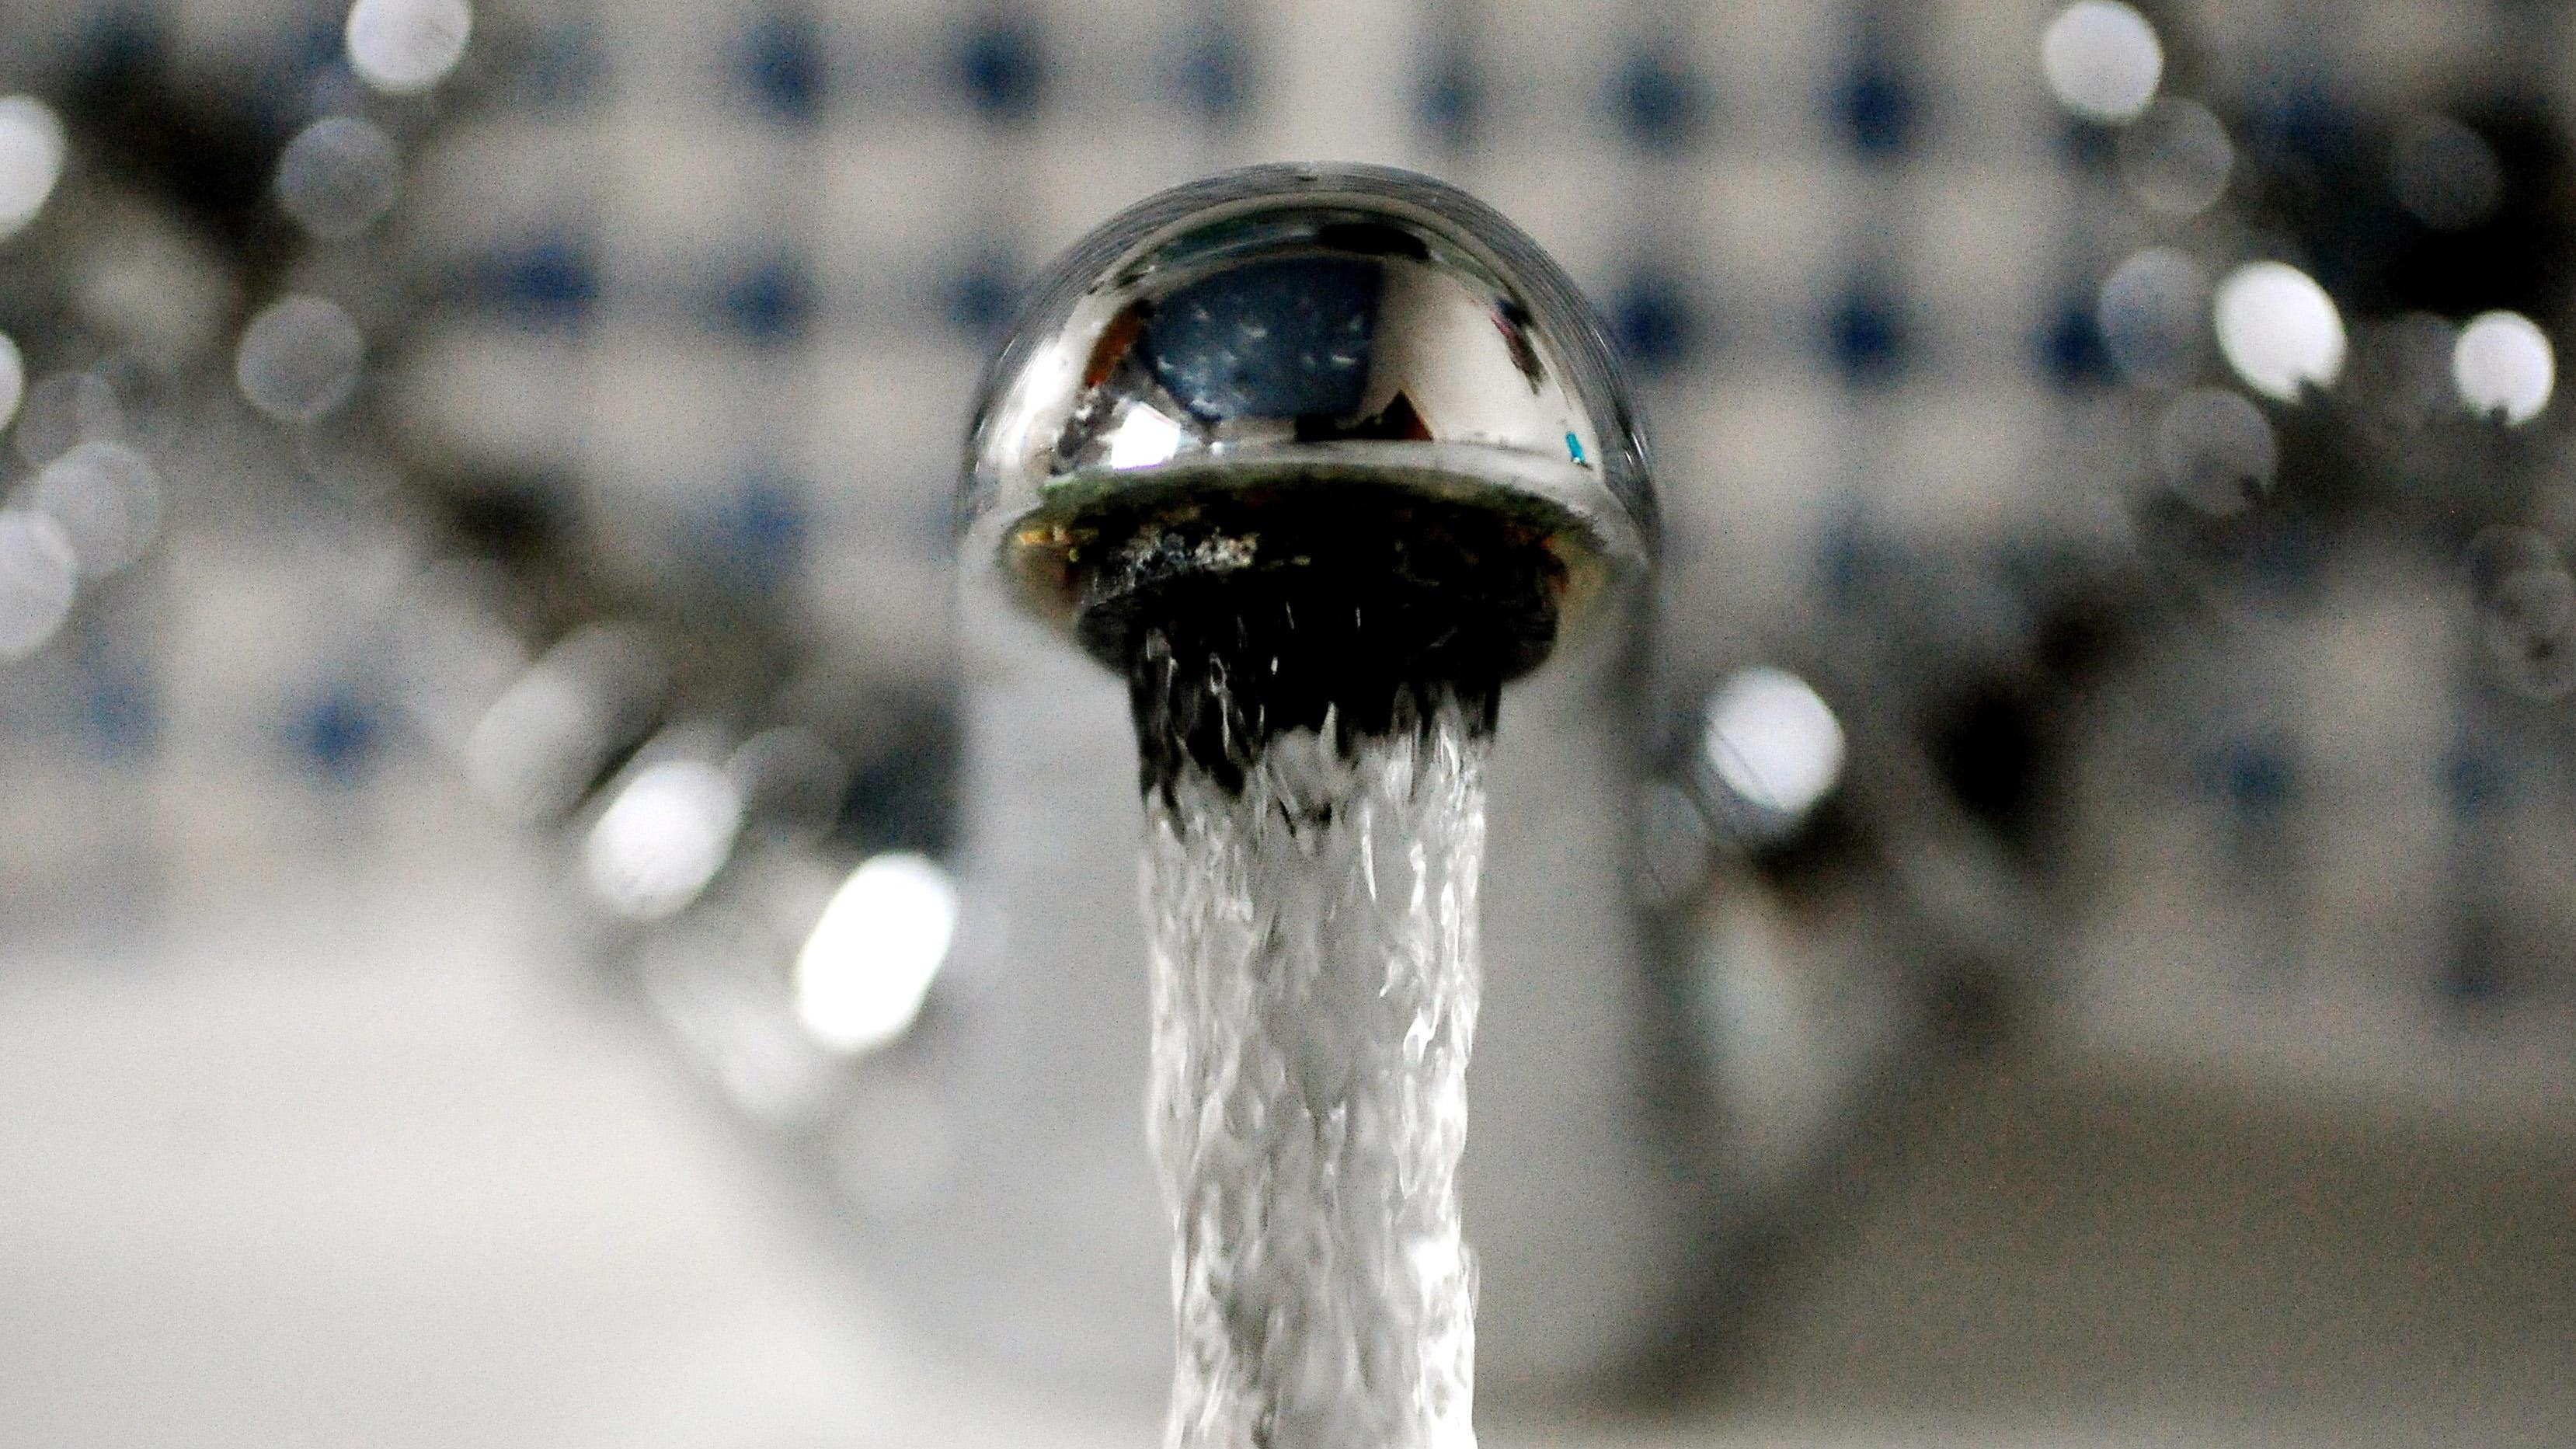 Impact of 31,000 East Sussex properties without water ‘drastic’ for businesses